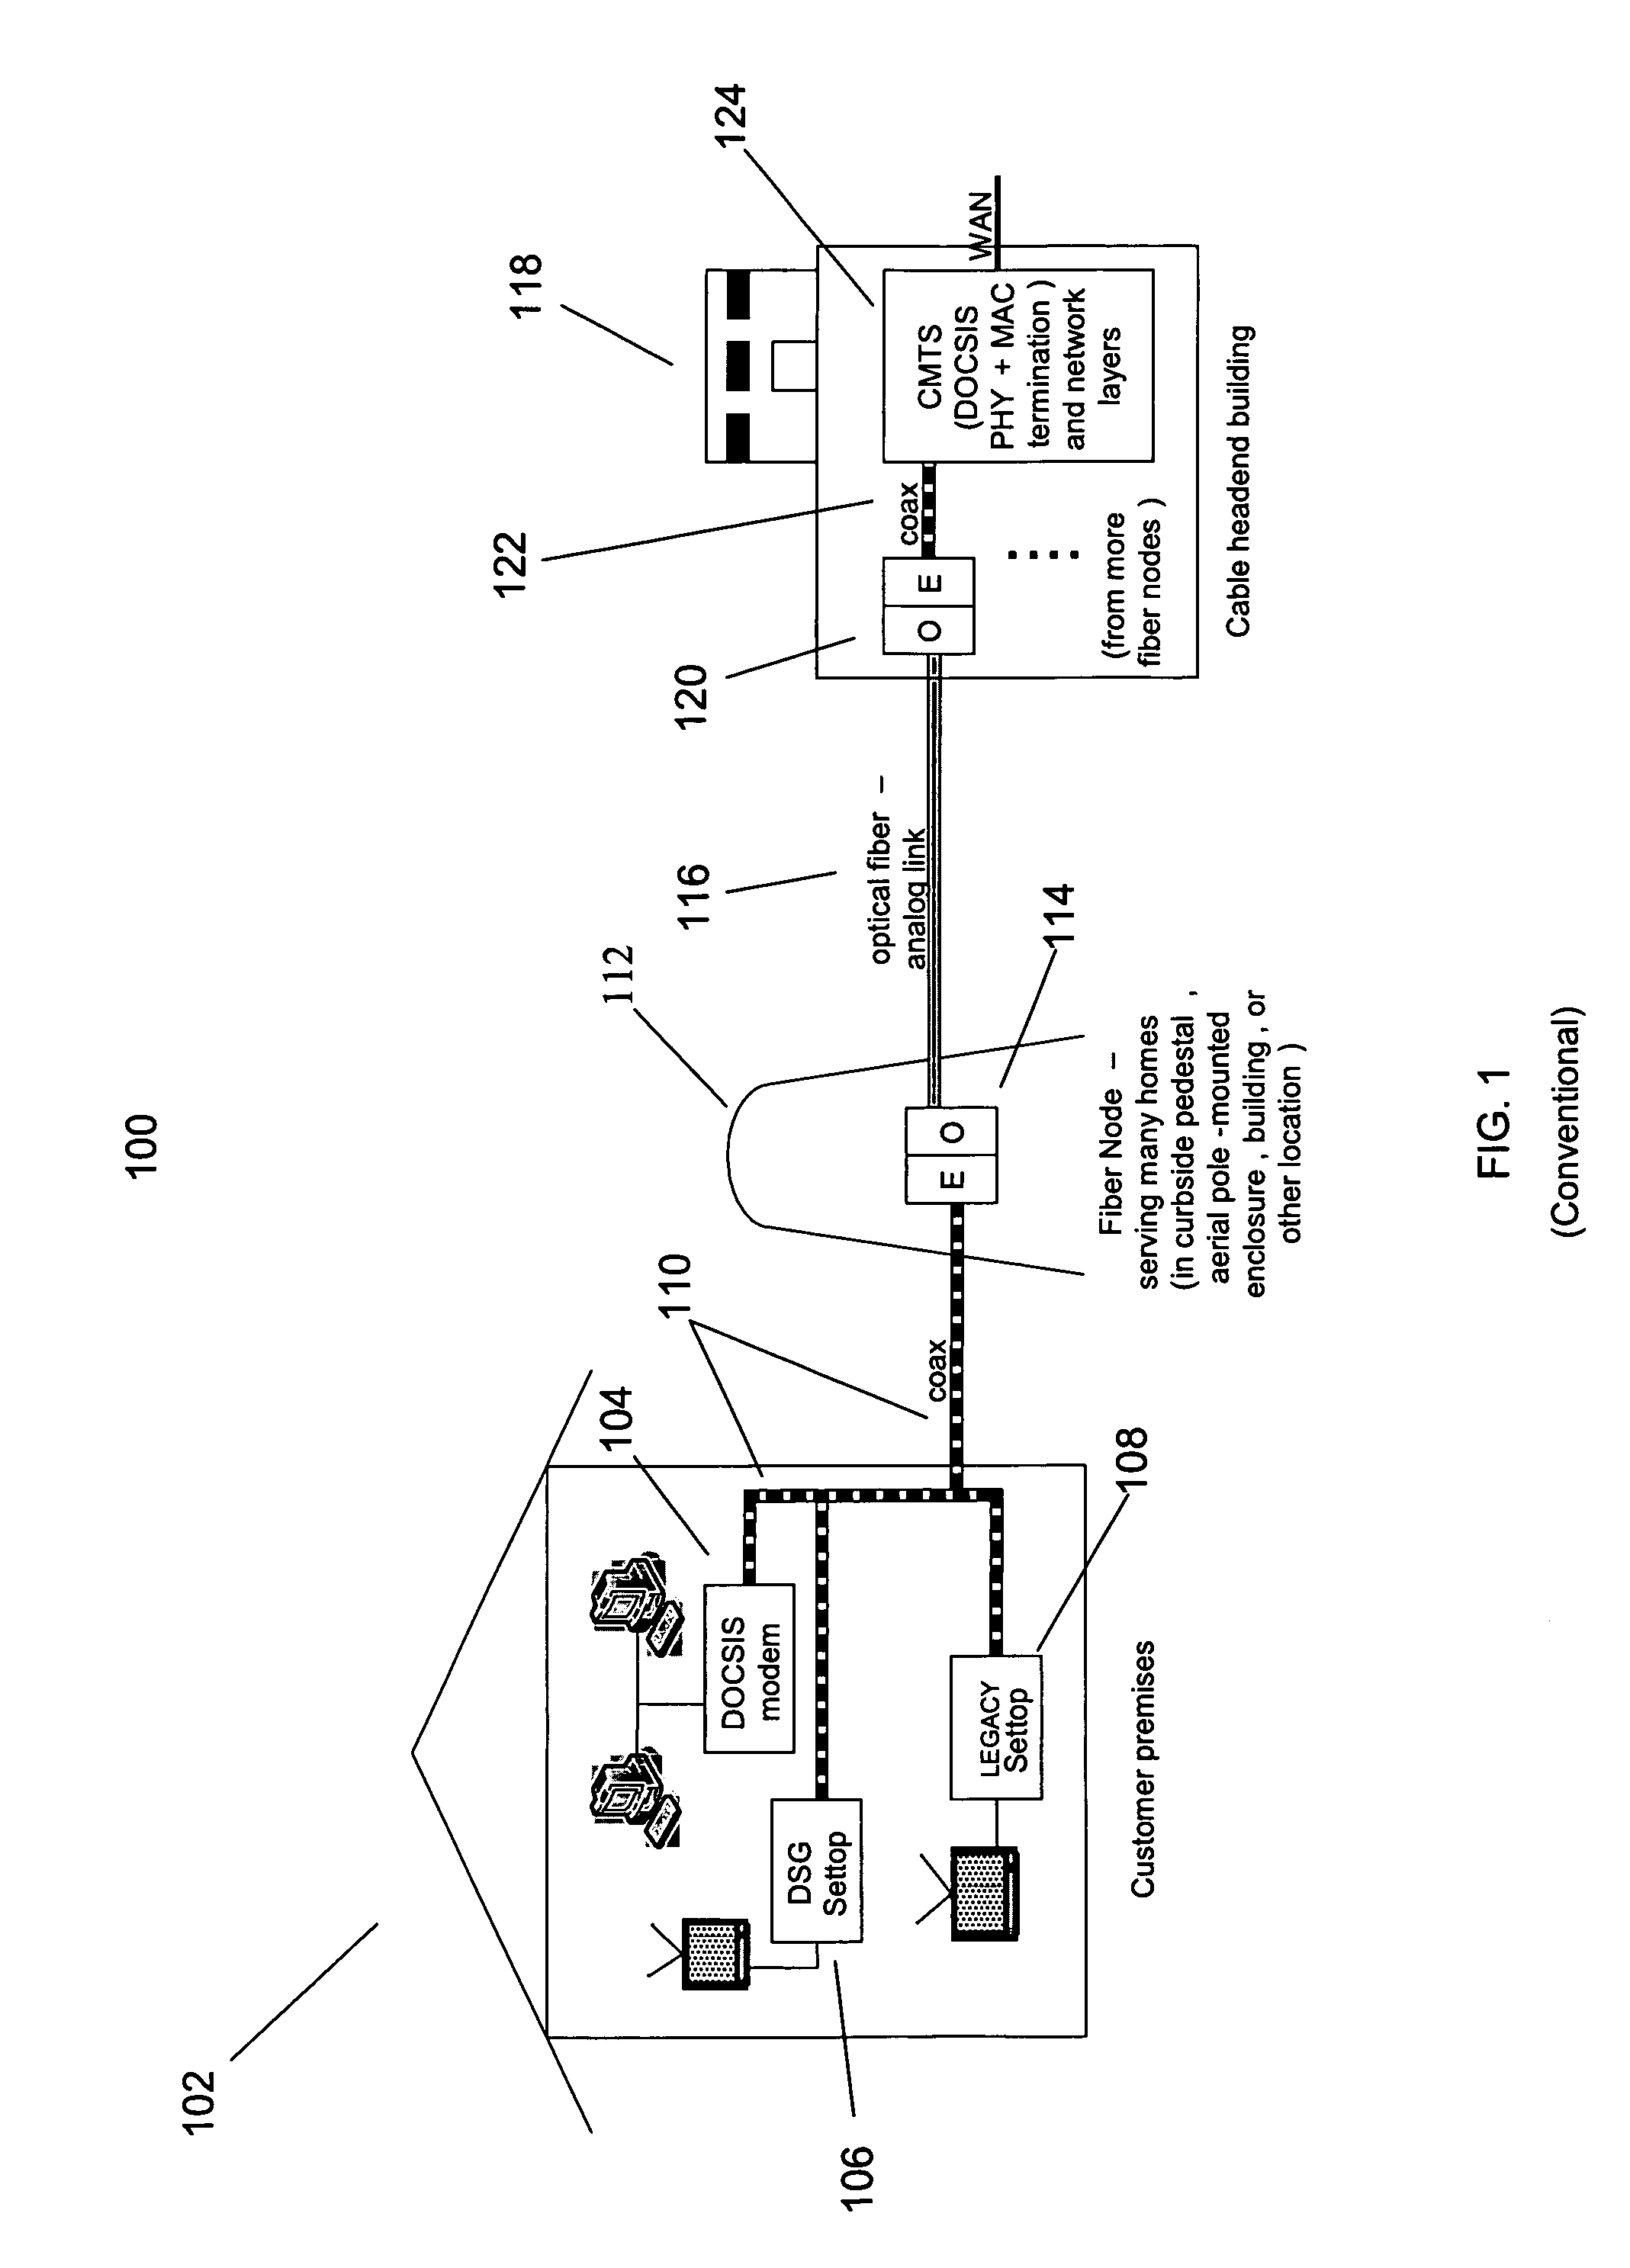 Network Architecture and Devices for Improving Performance of Hybrid Fiber Coax Cable Data Systems